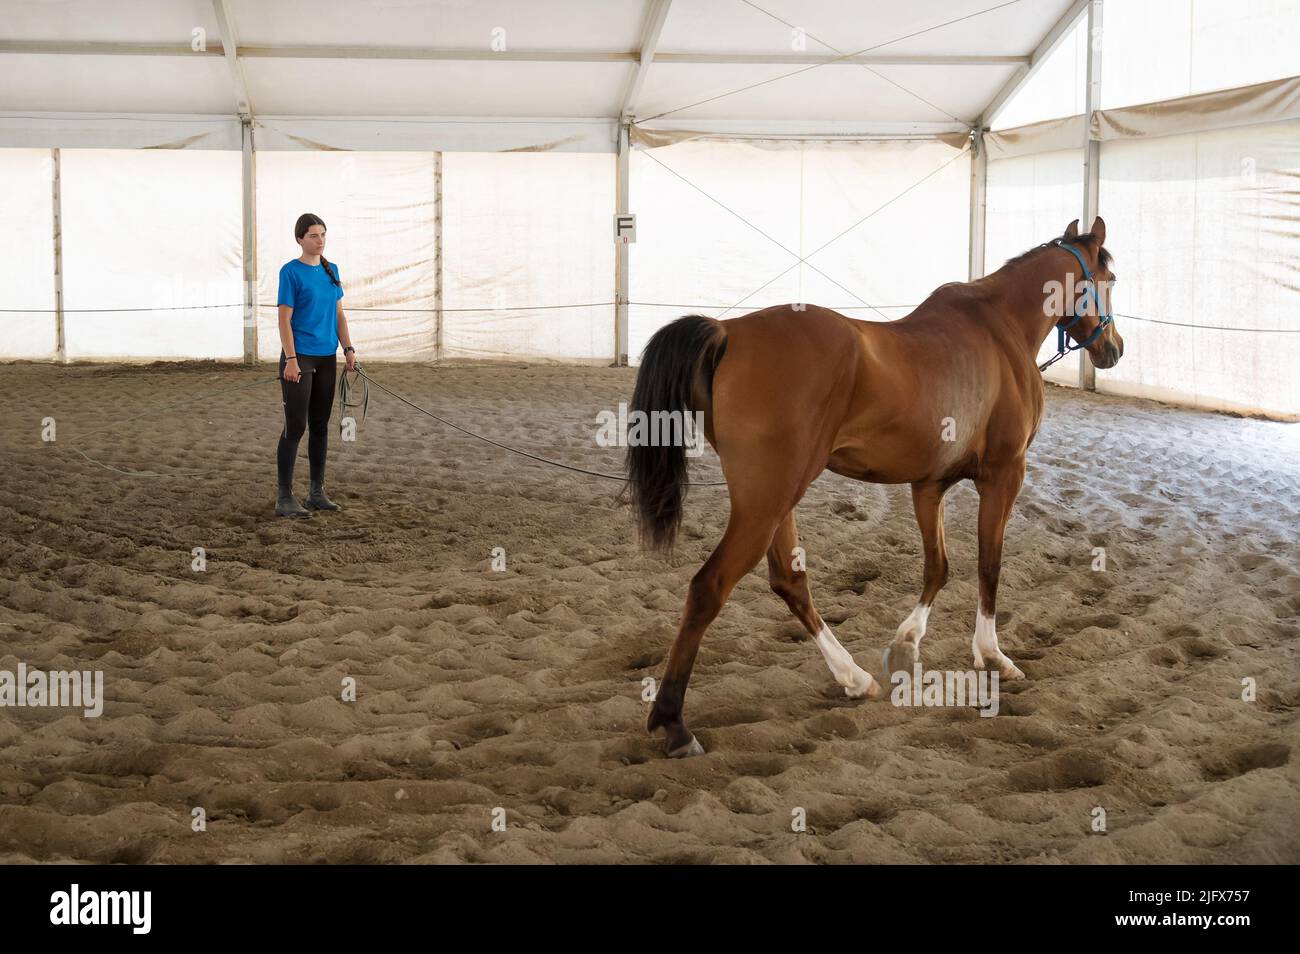 Obedient bay horse walking on sand near young brunette during training in arena on ranch Stock Photo